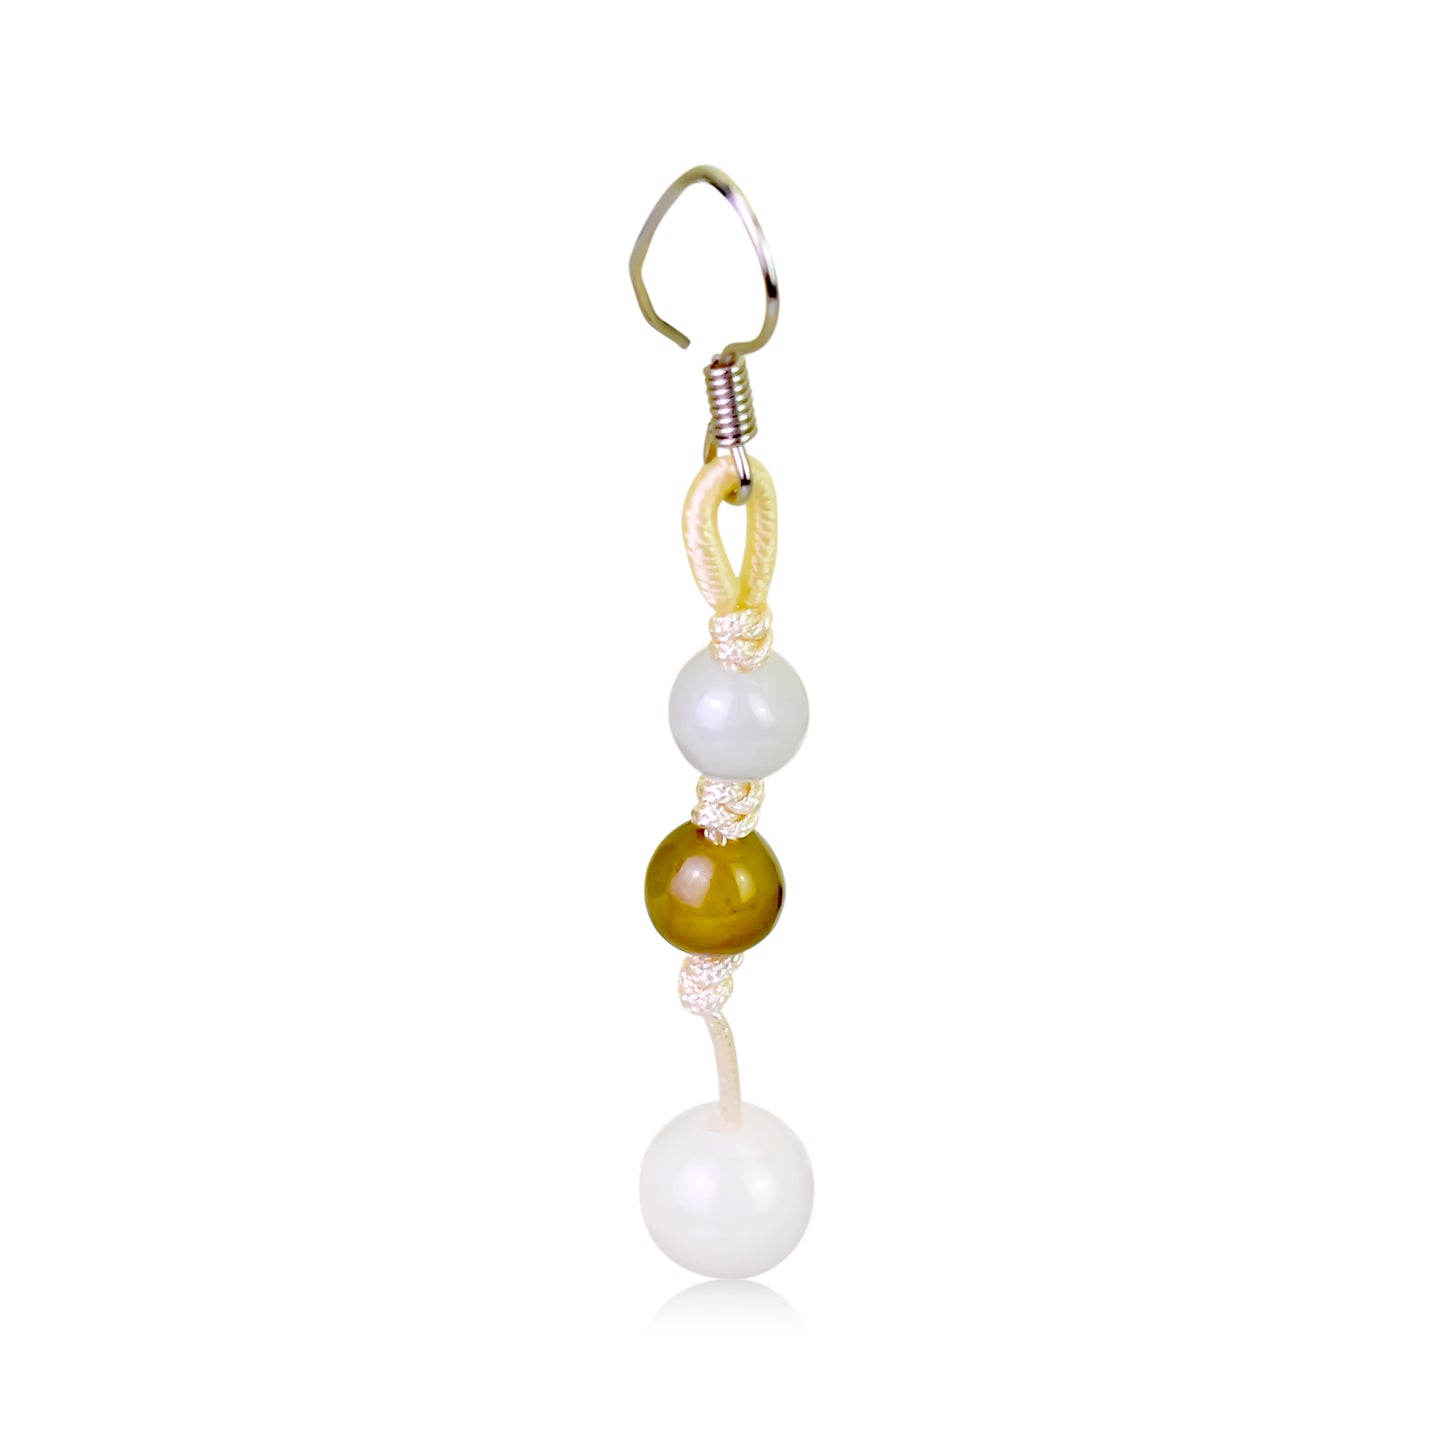 Add a Little Color to Your Look with Playful Beads Rose Quartz Earrings made with White Cord